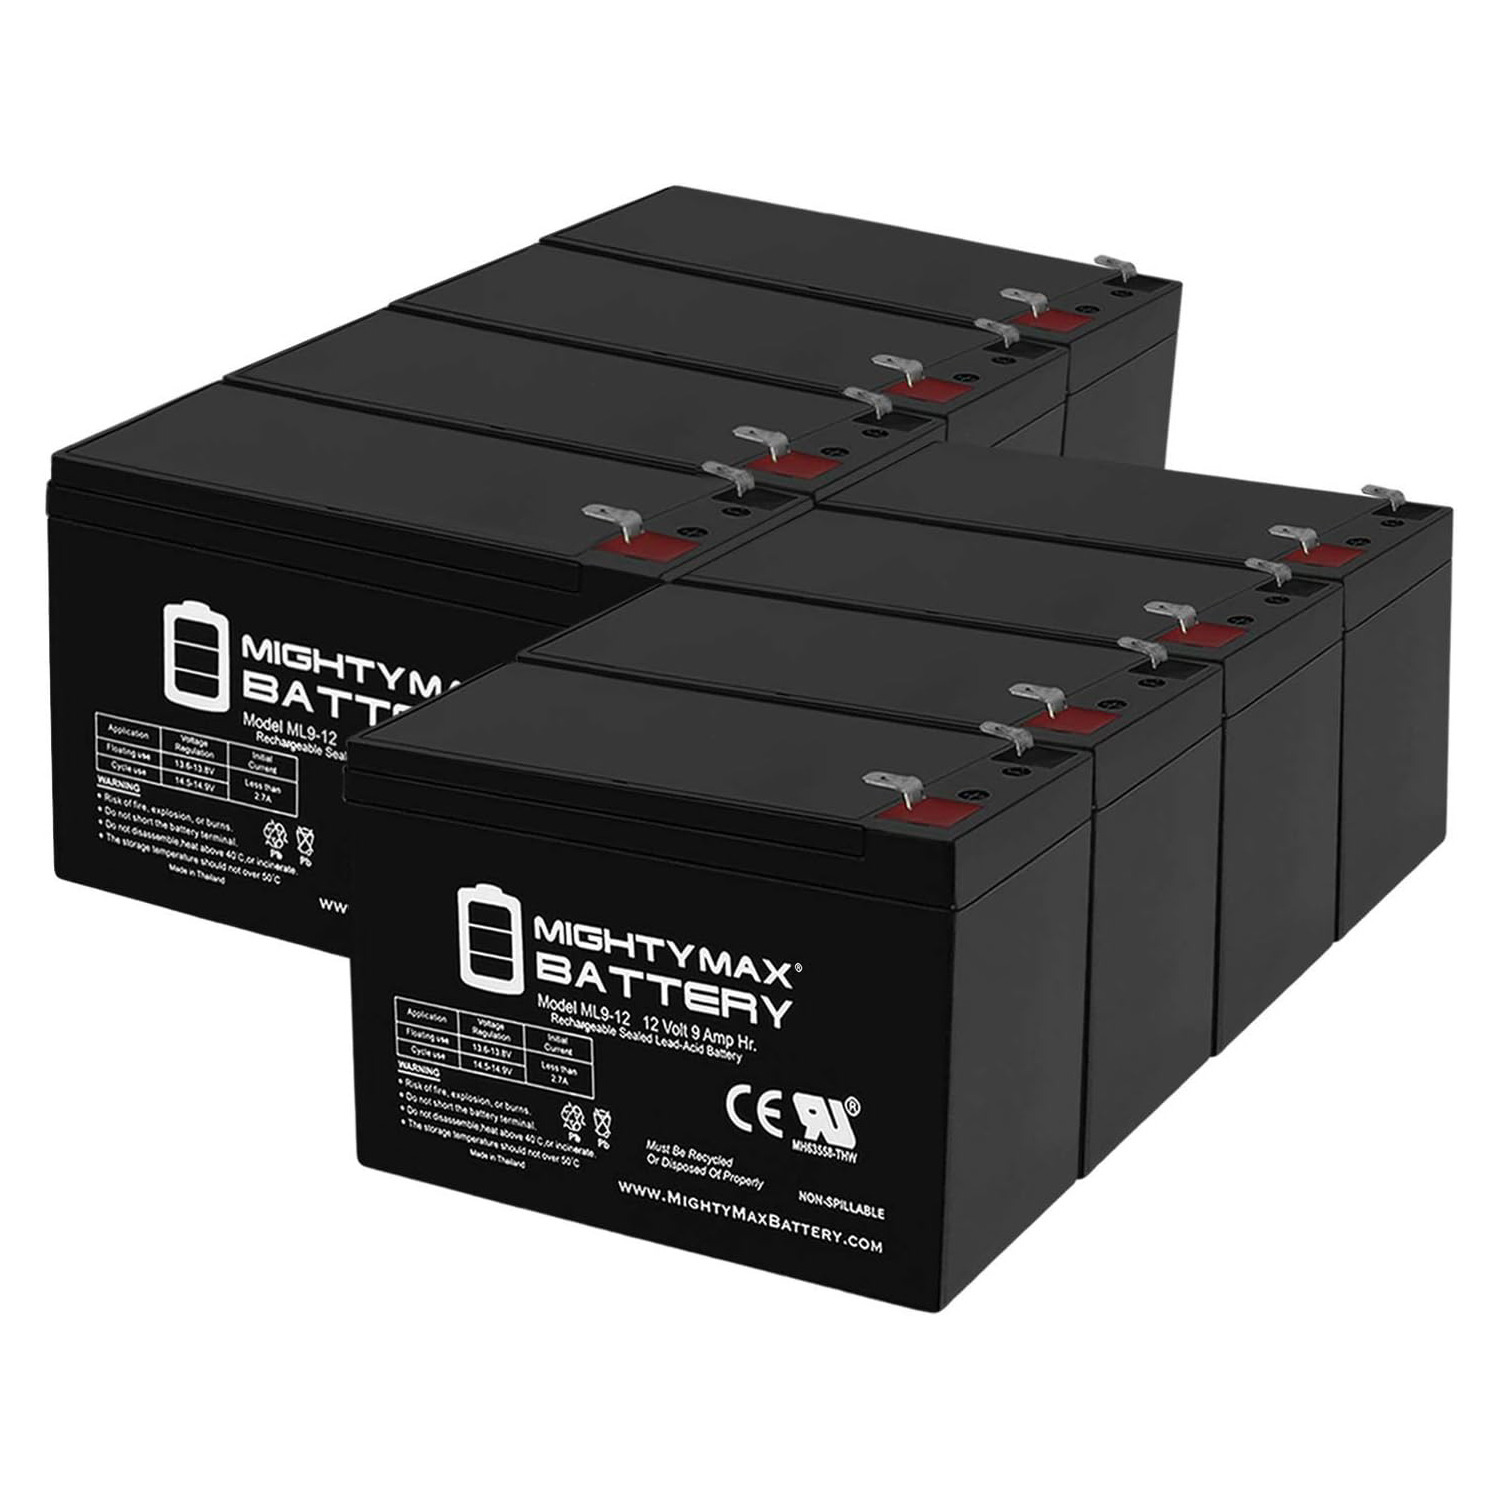 Altronix SMP5PMCTXPD16CB 12V, 9Ah Lead Acid Battery - 8 Pack